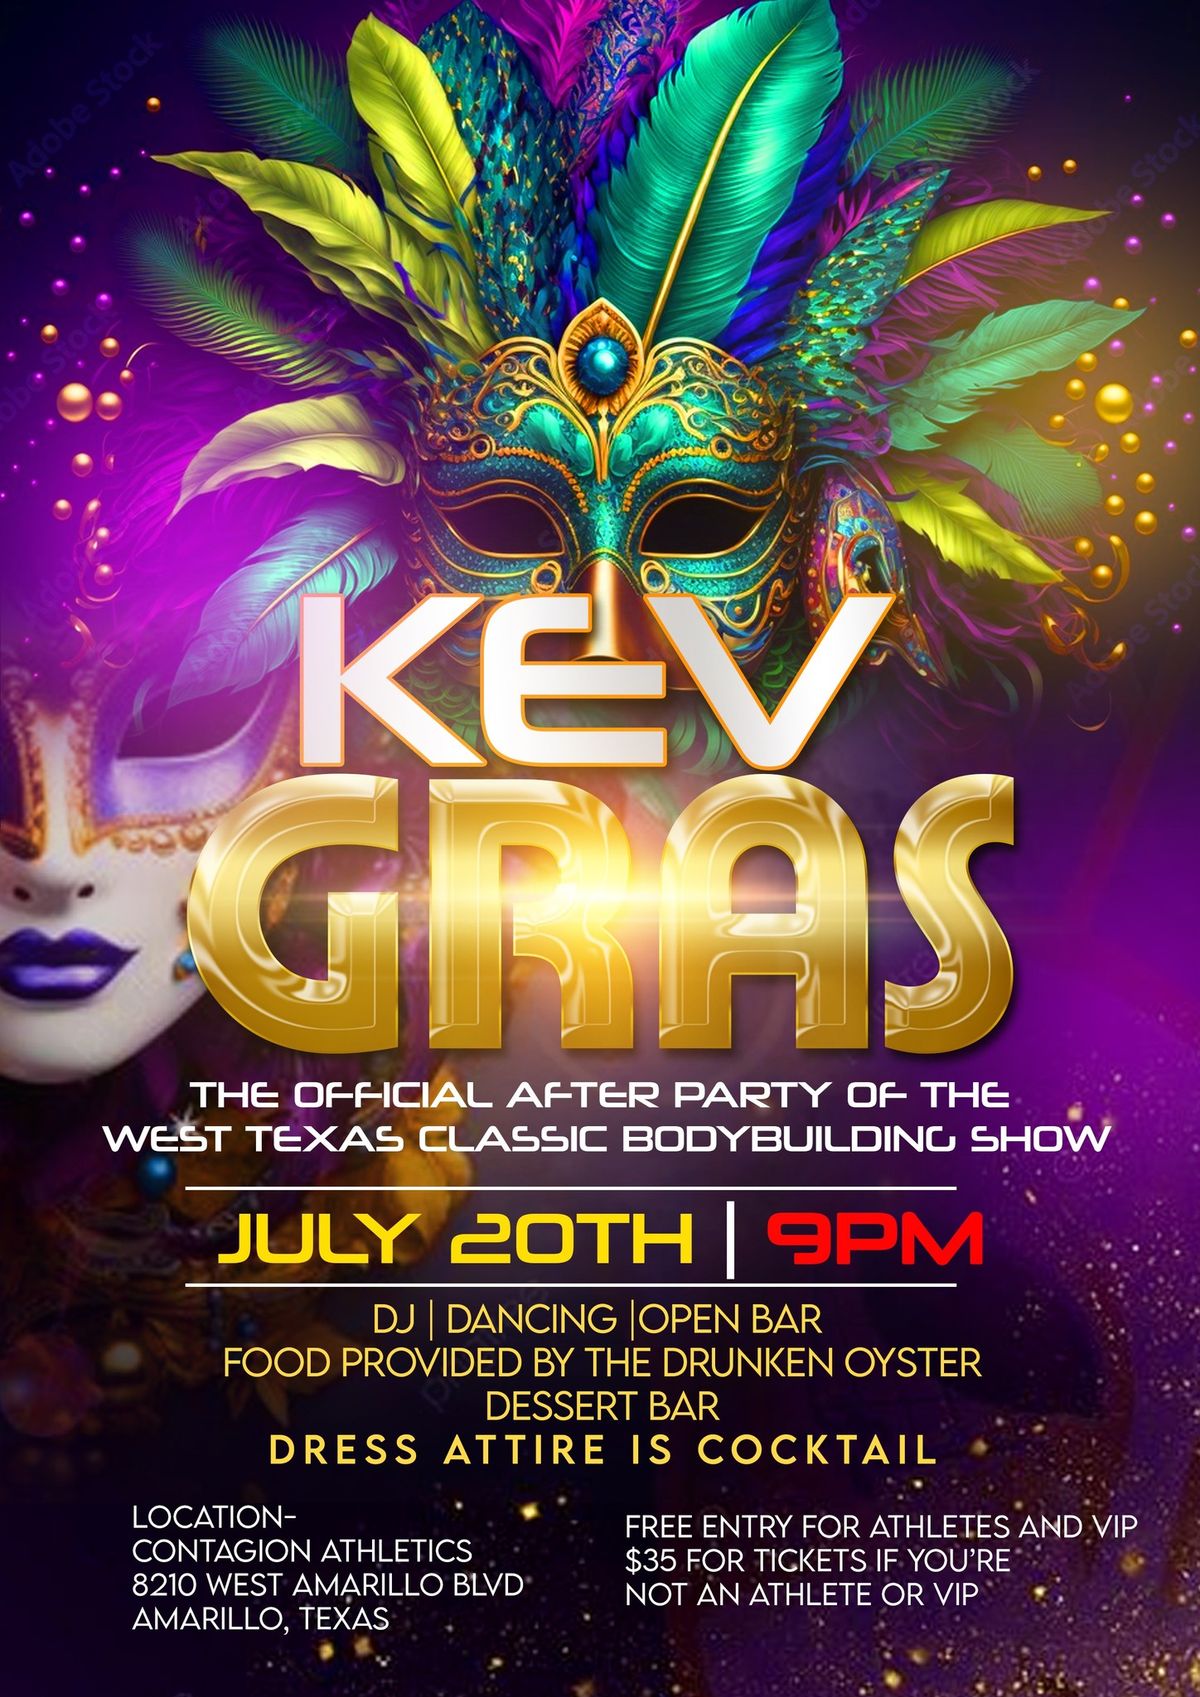 Kev Gras-The Official After Party of the West Texas Classic Bodybuilding Show